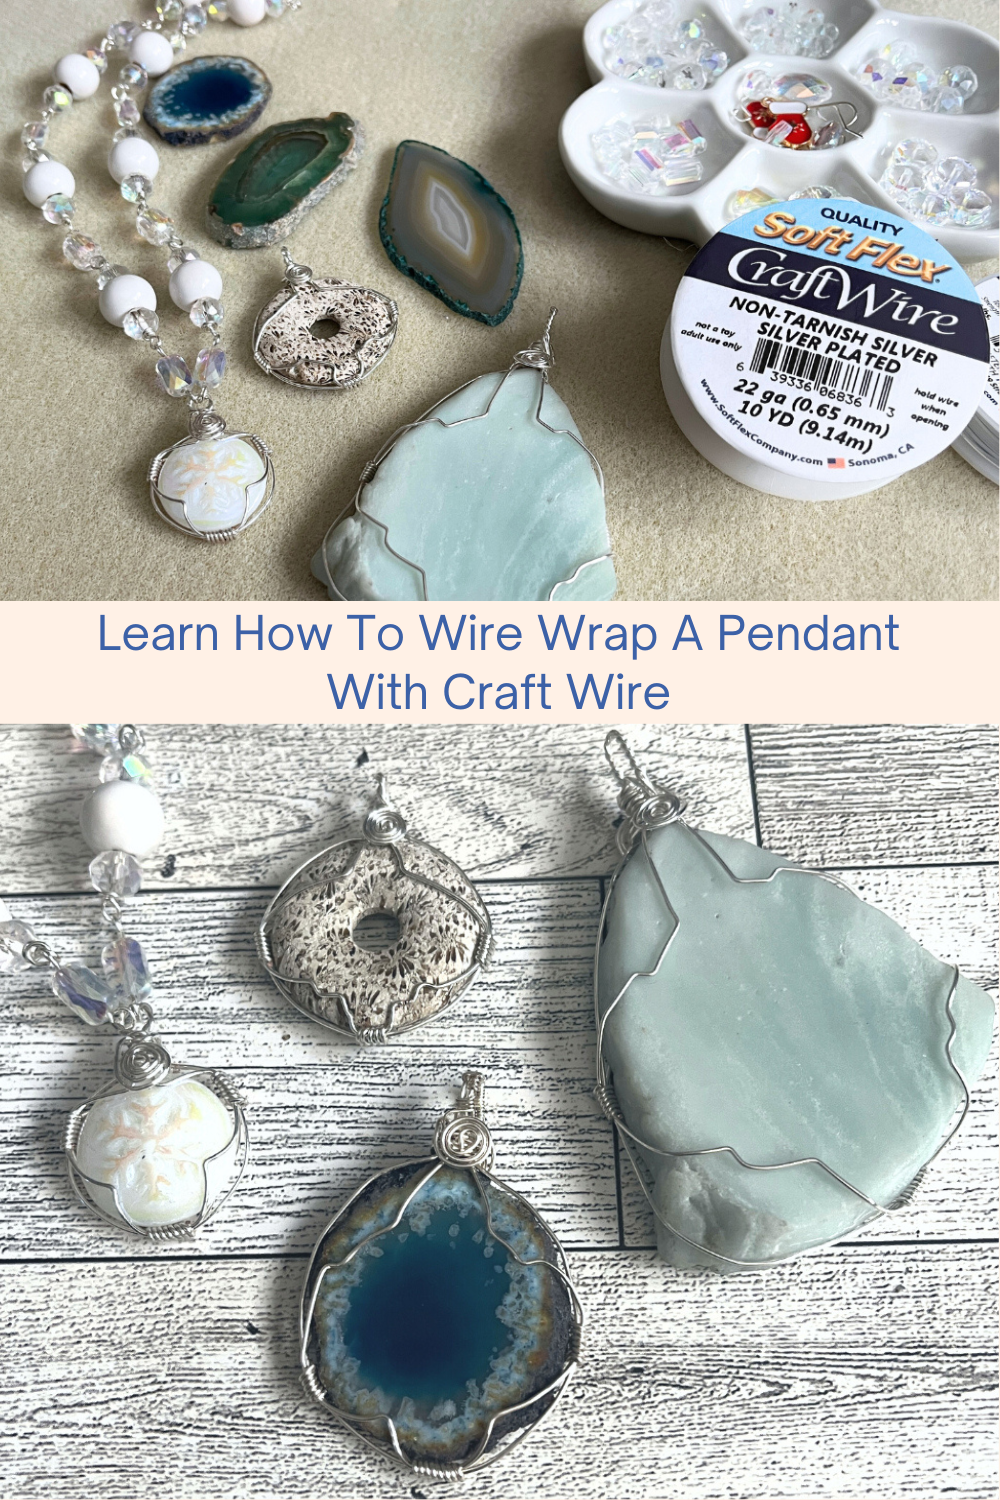 Learn How To Wire Wrap A Pendant With Craft Wire Collage